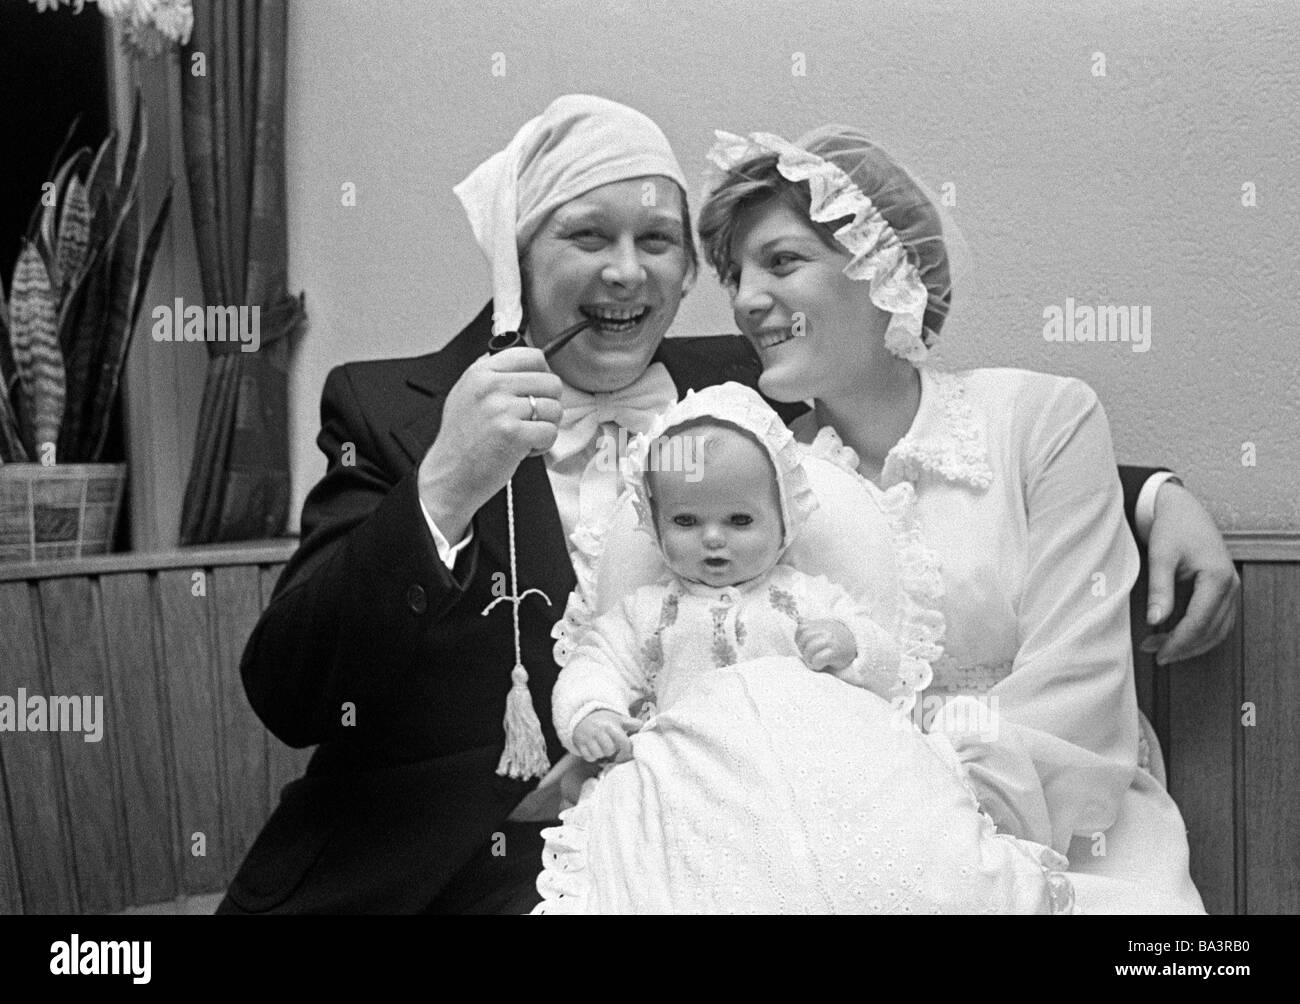 Seventies, black and white photo, humour, people, wedding, bridal pair dressed with bedcaps pose with a doll and look forward to the offspring, man smoking a pipe wears a jelly bag cap, aged 20 to 30 years, Guenter, Angelika Stock Photo